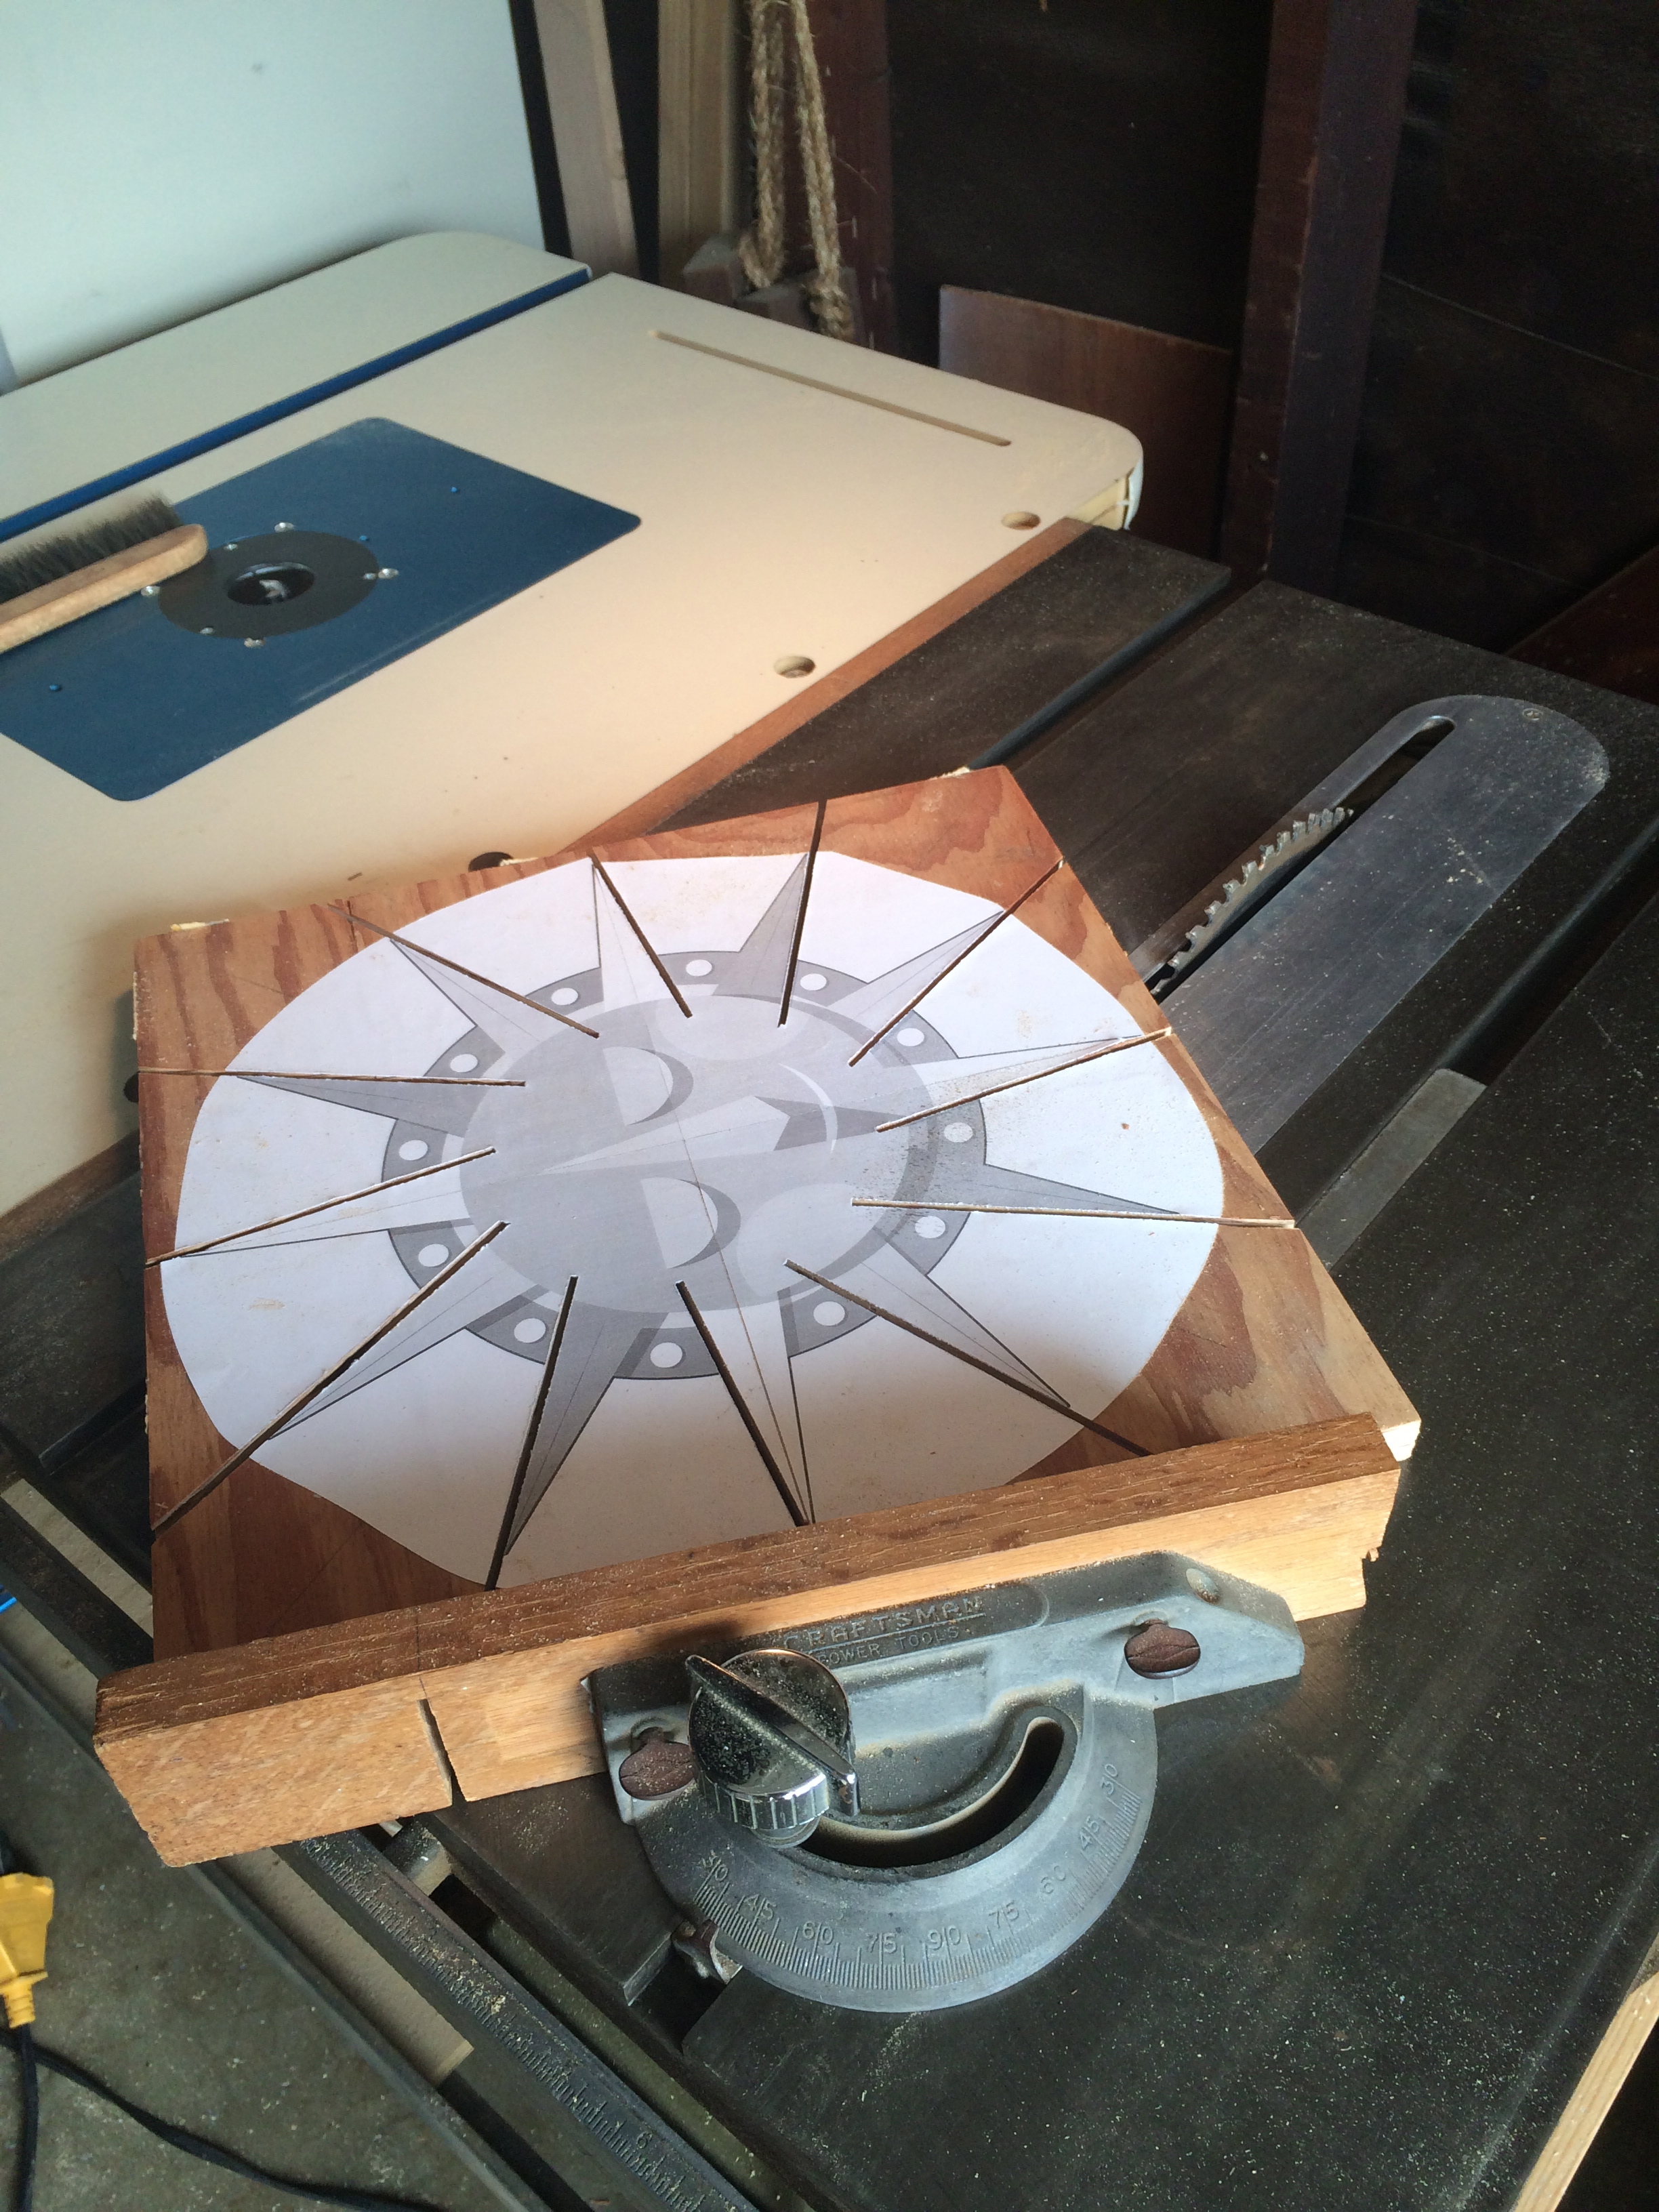  For the first prototype, I made router jigs for the sunburst shape and the various disks that make up the piece. 